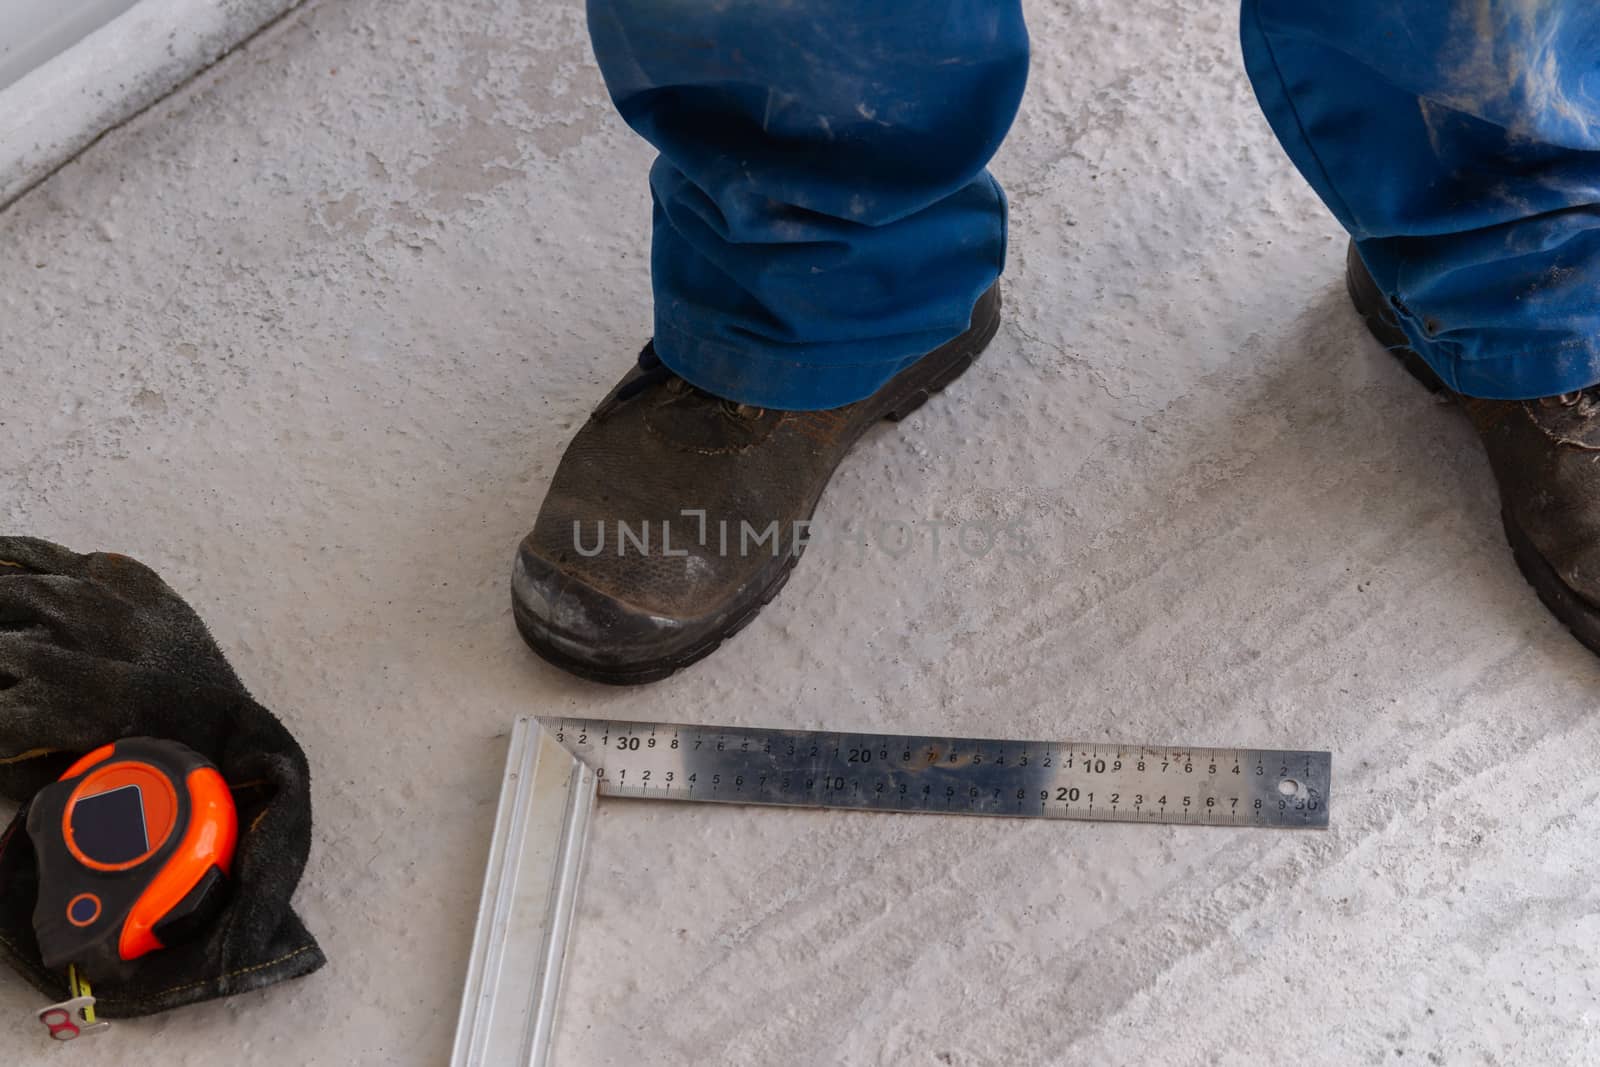 A man is standing on a concrete floor unfinished construction near ruler, measuring tape and metal setsquare.